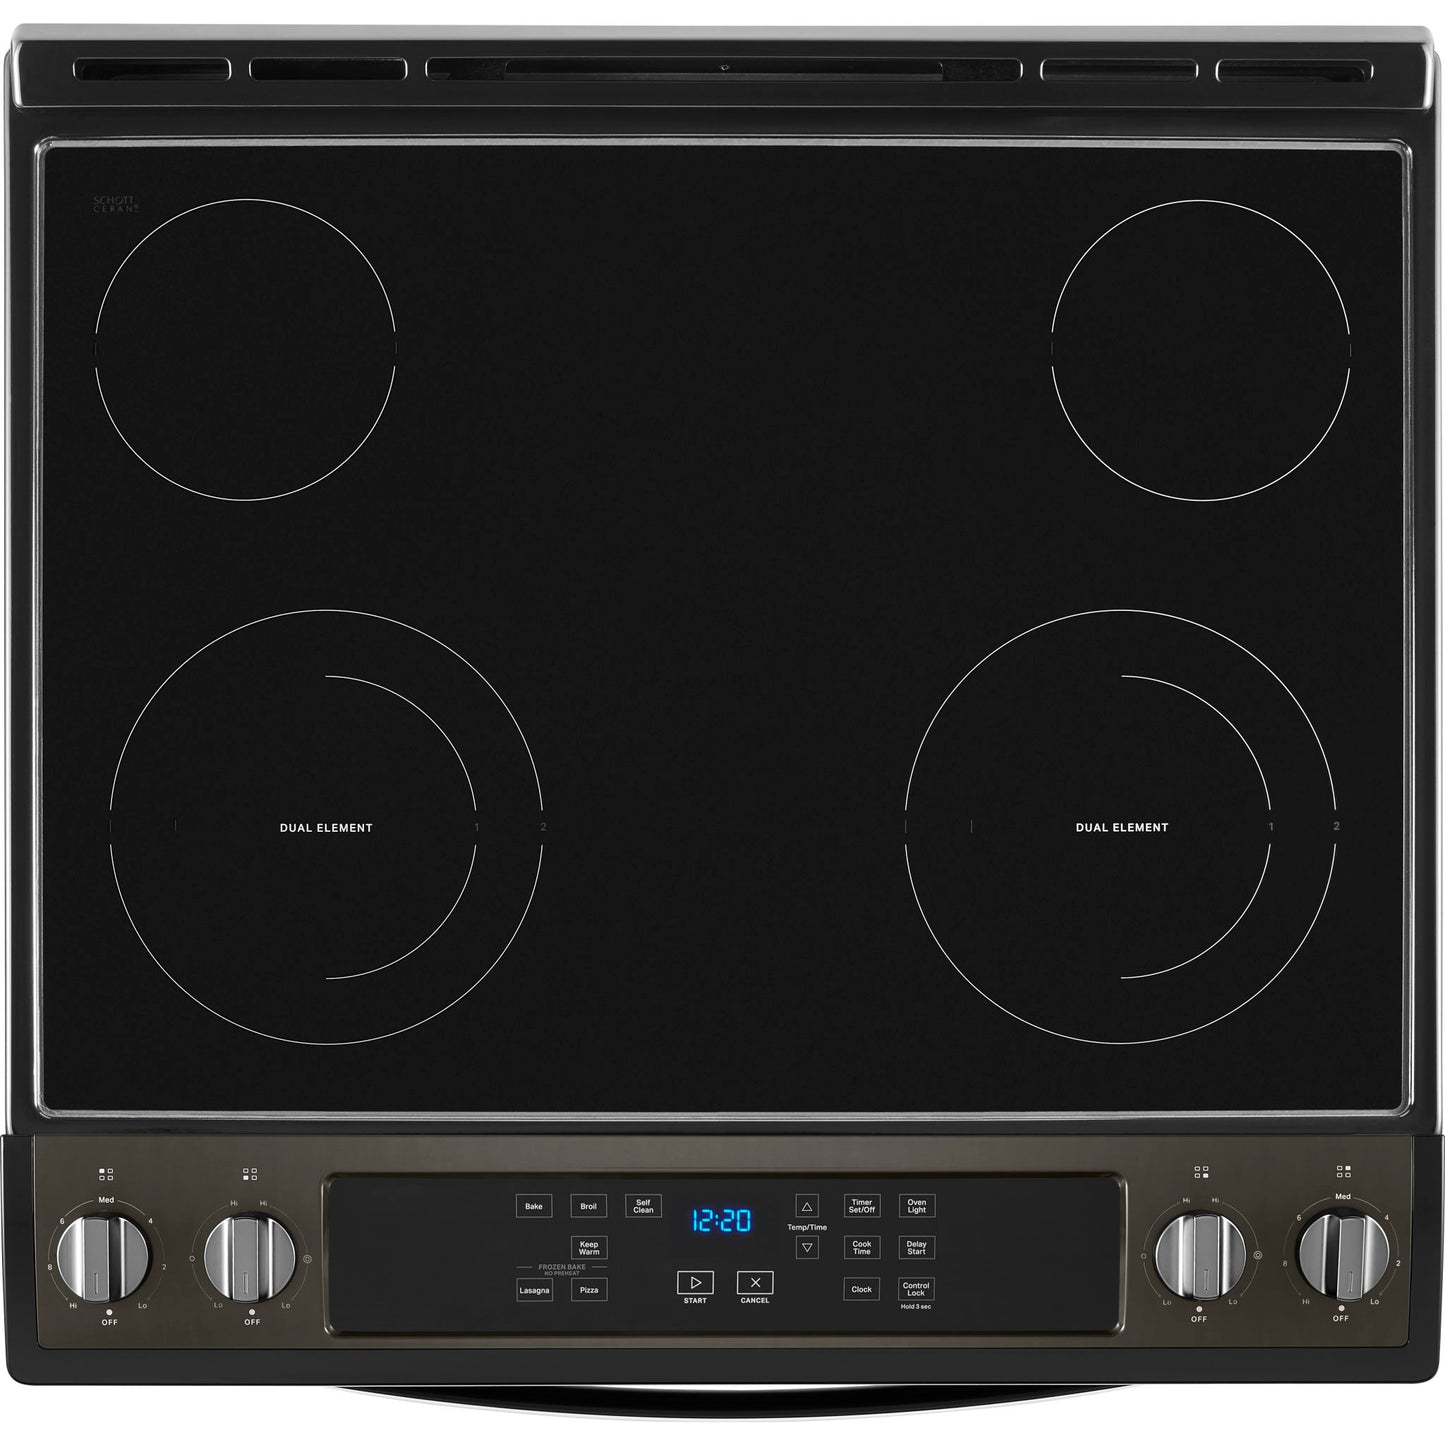 Whirlpool Electric Range (YWEE515S0LV) - Black Stainless